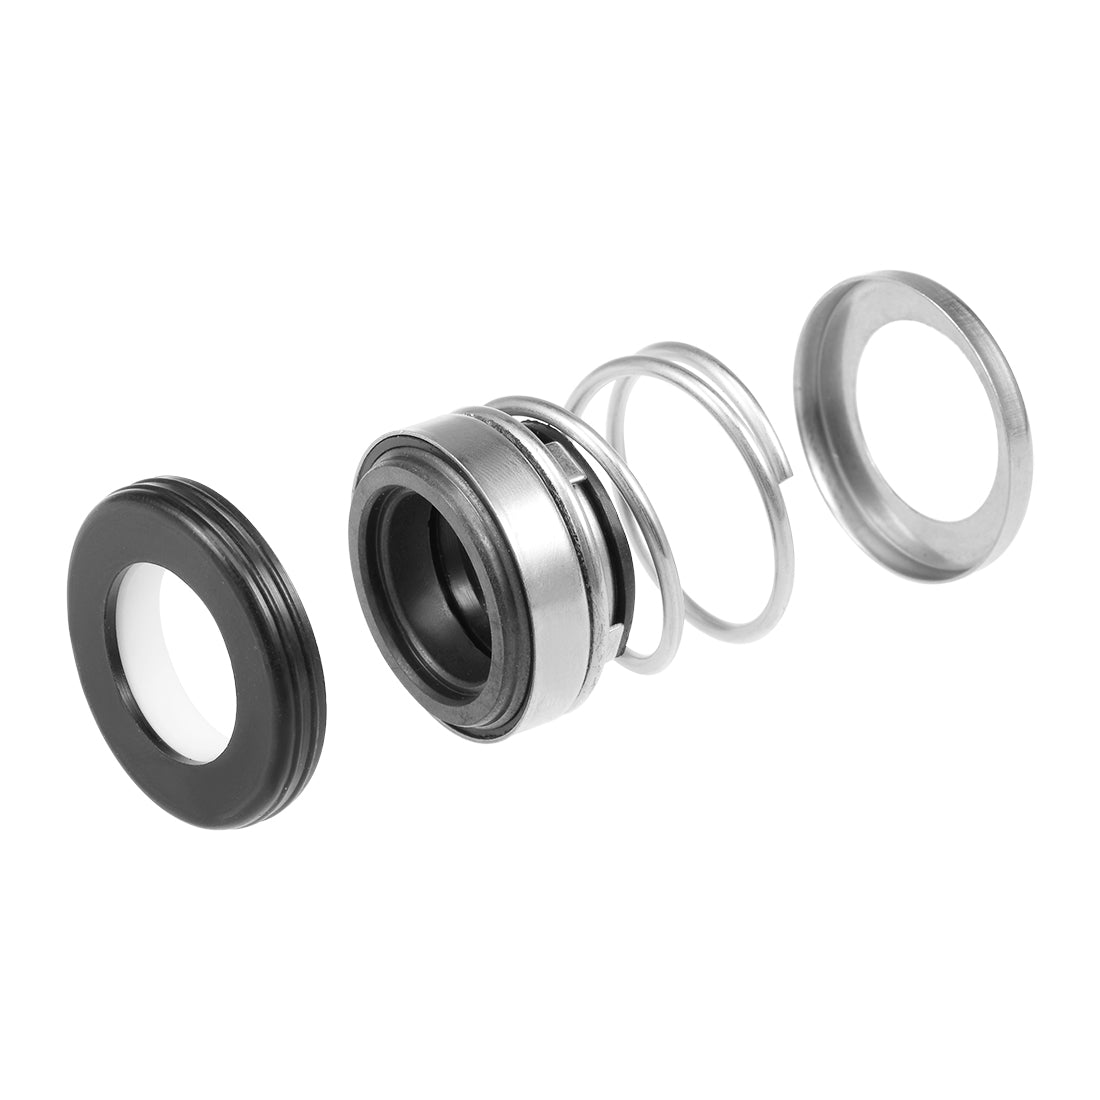 uxcell Uxcell Mechanical Shaft Seal Replacement for Pool Spa Pump 3pcs 108-14